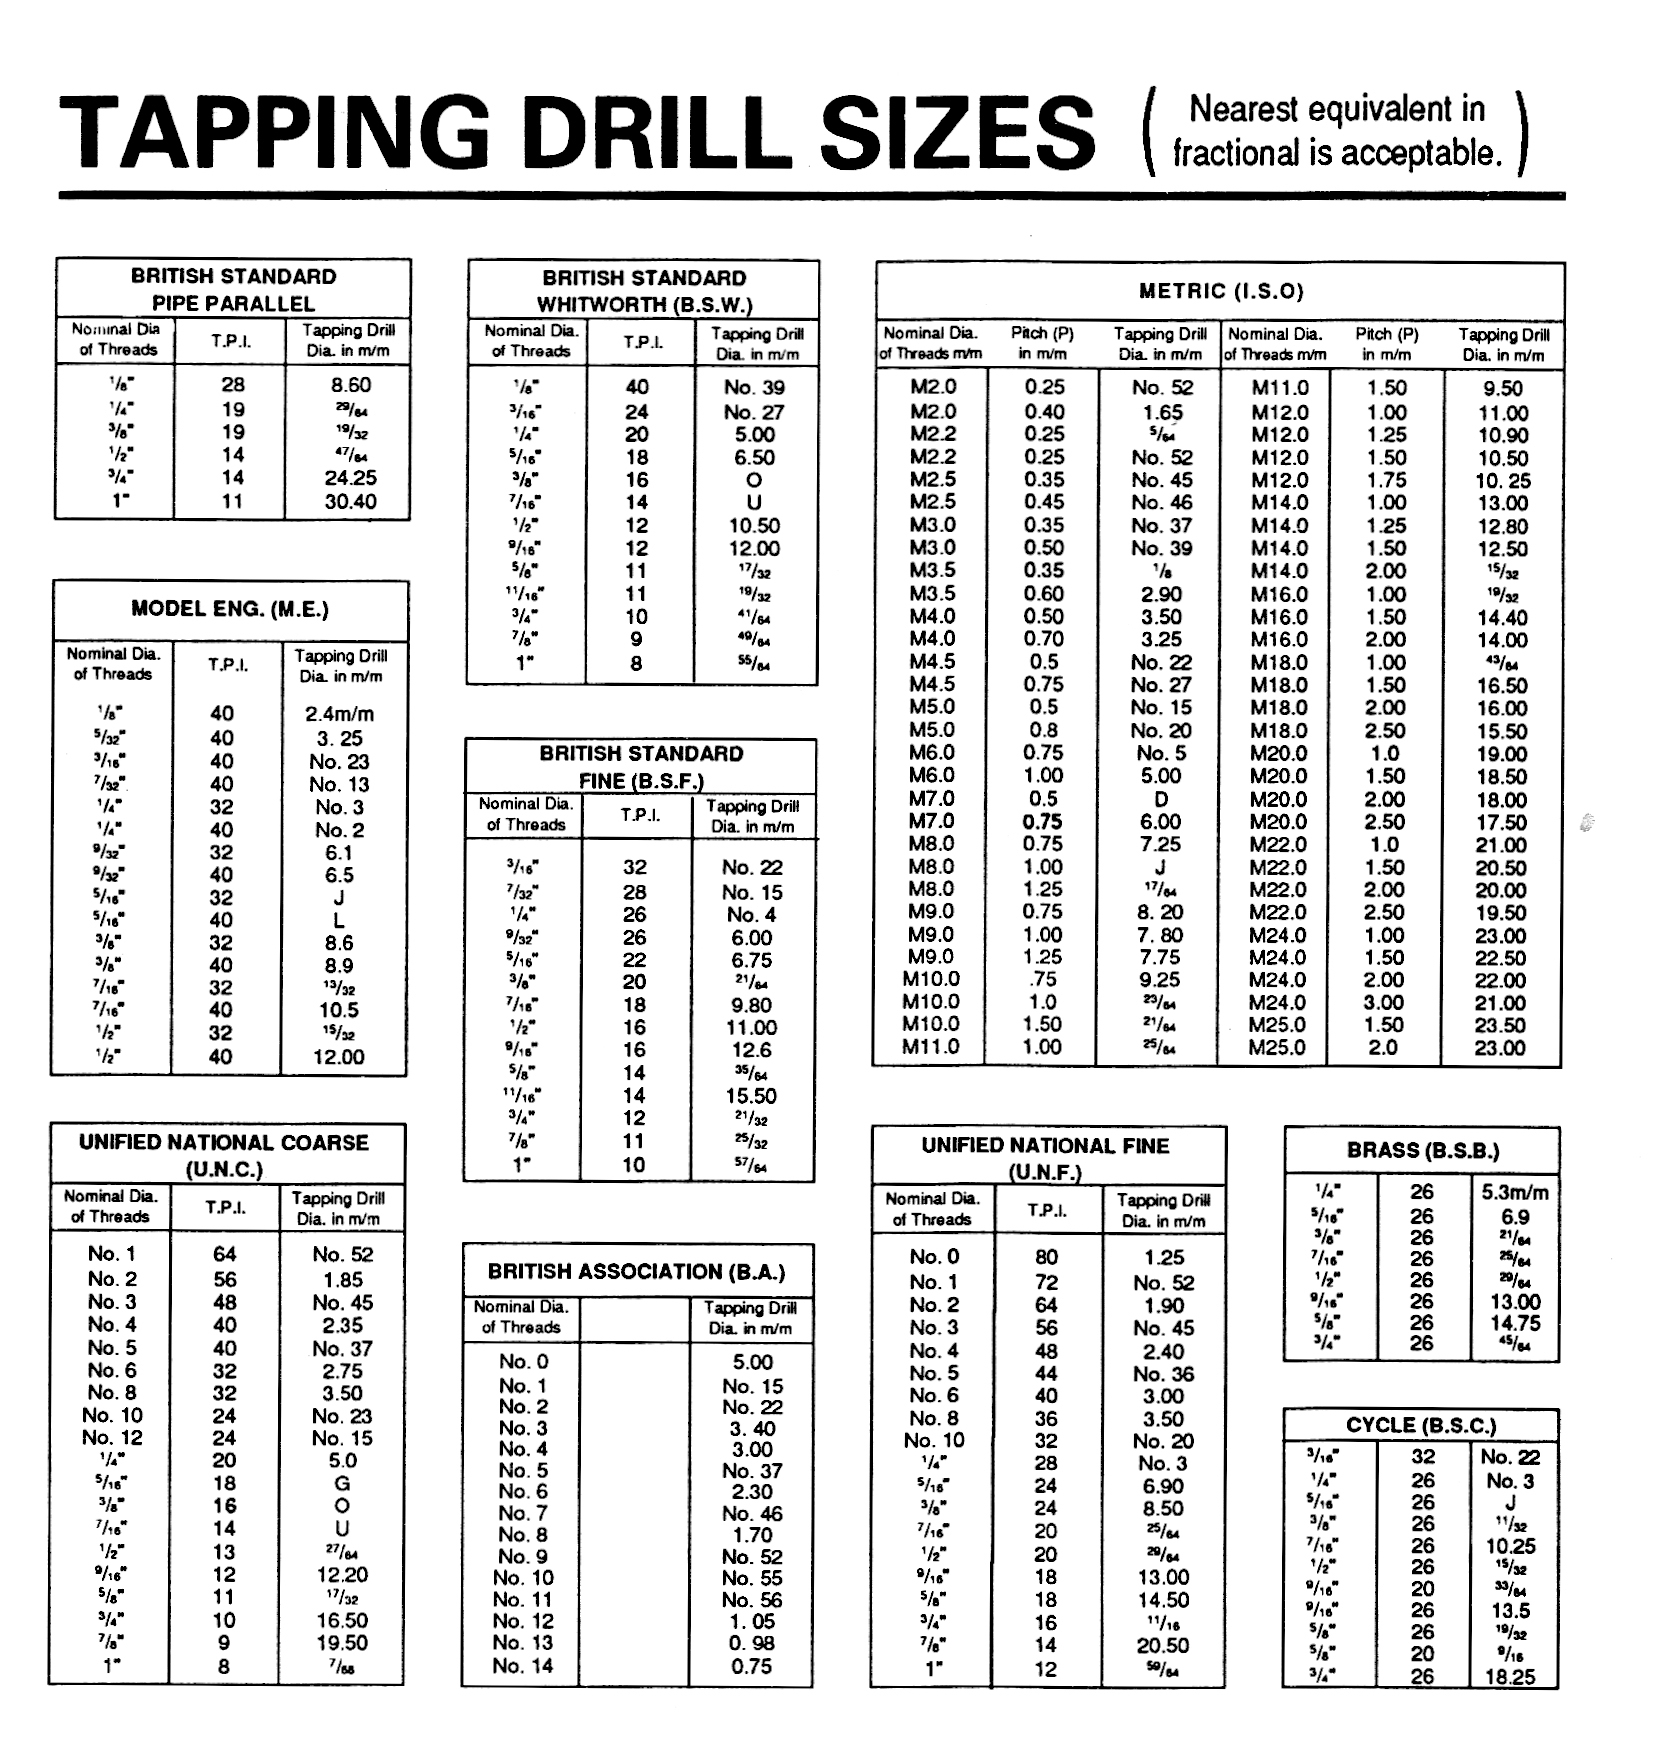 tapping drill sizes.jpg